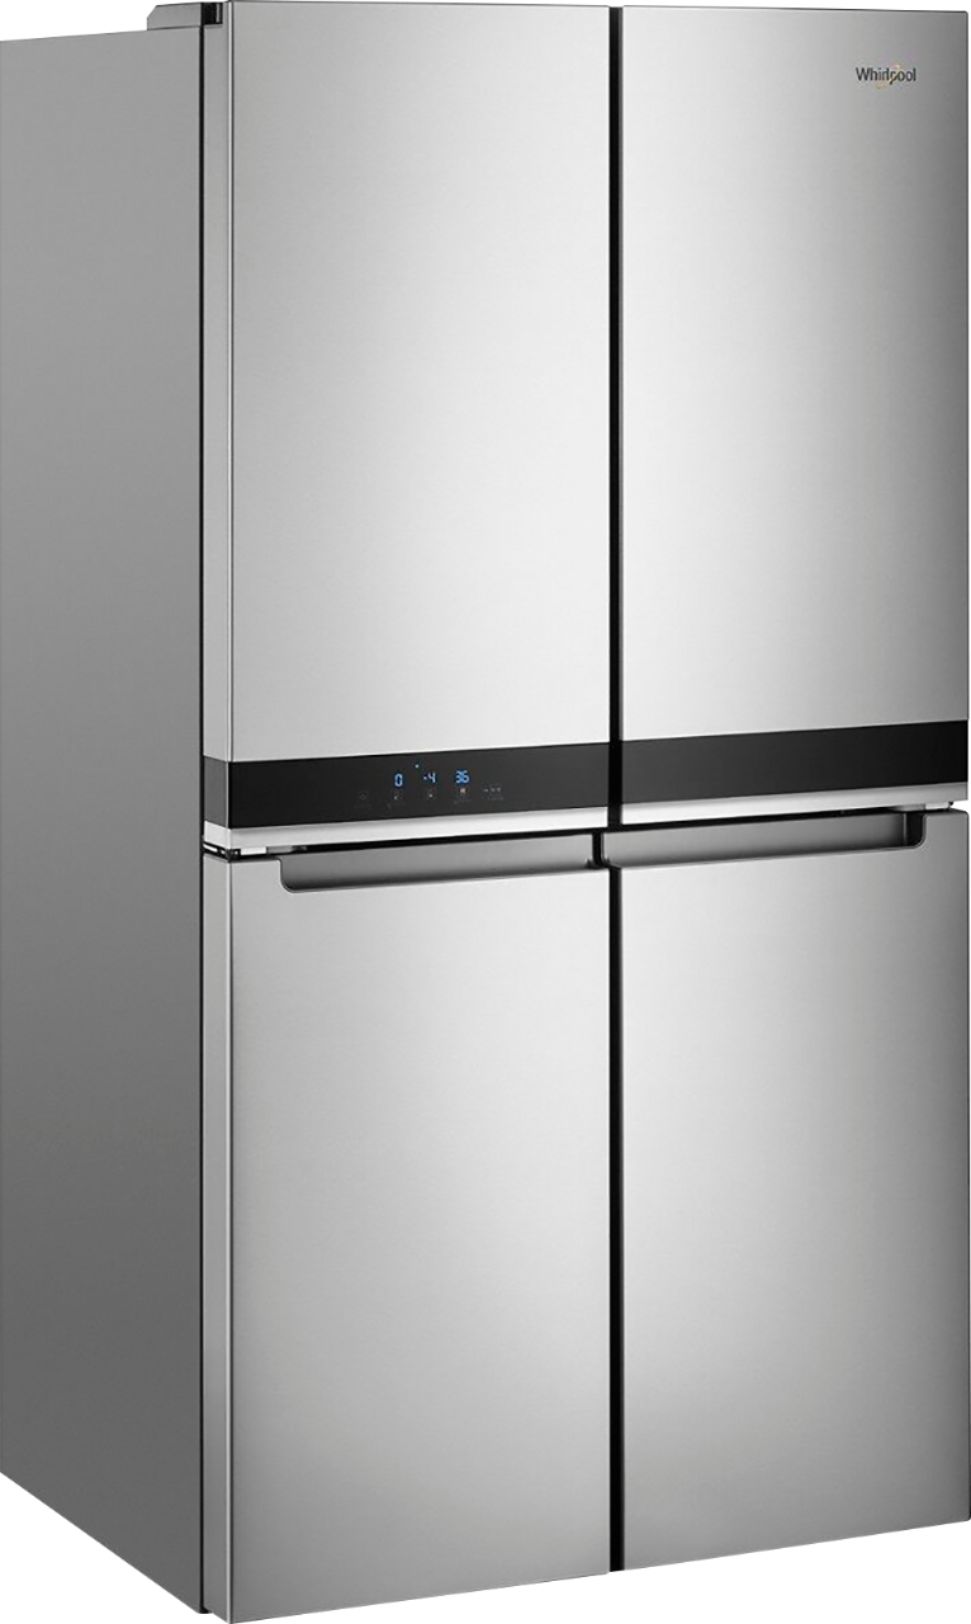 Angle View: Samsung - 25 cu. ft. Large Capacity 4-Door French Door Refrigerator with External Water & Ice Dispenser - Black stainless steel